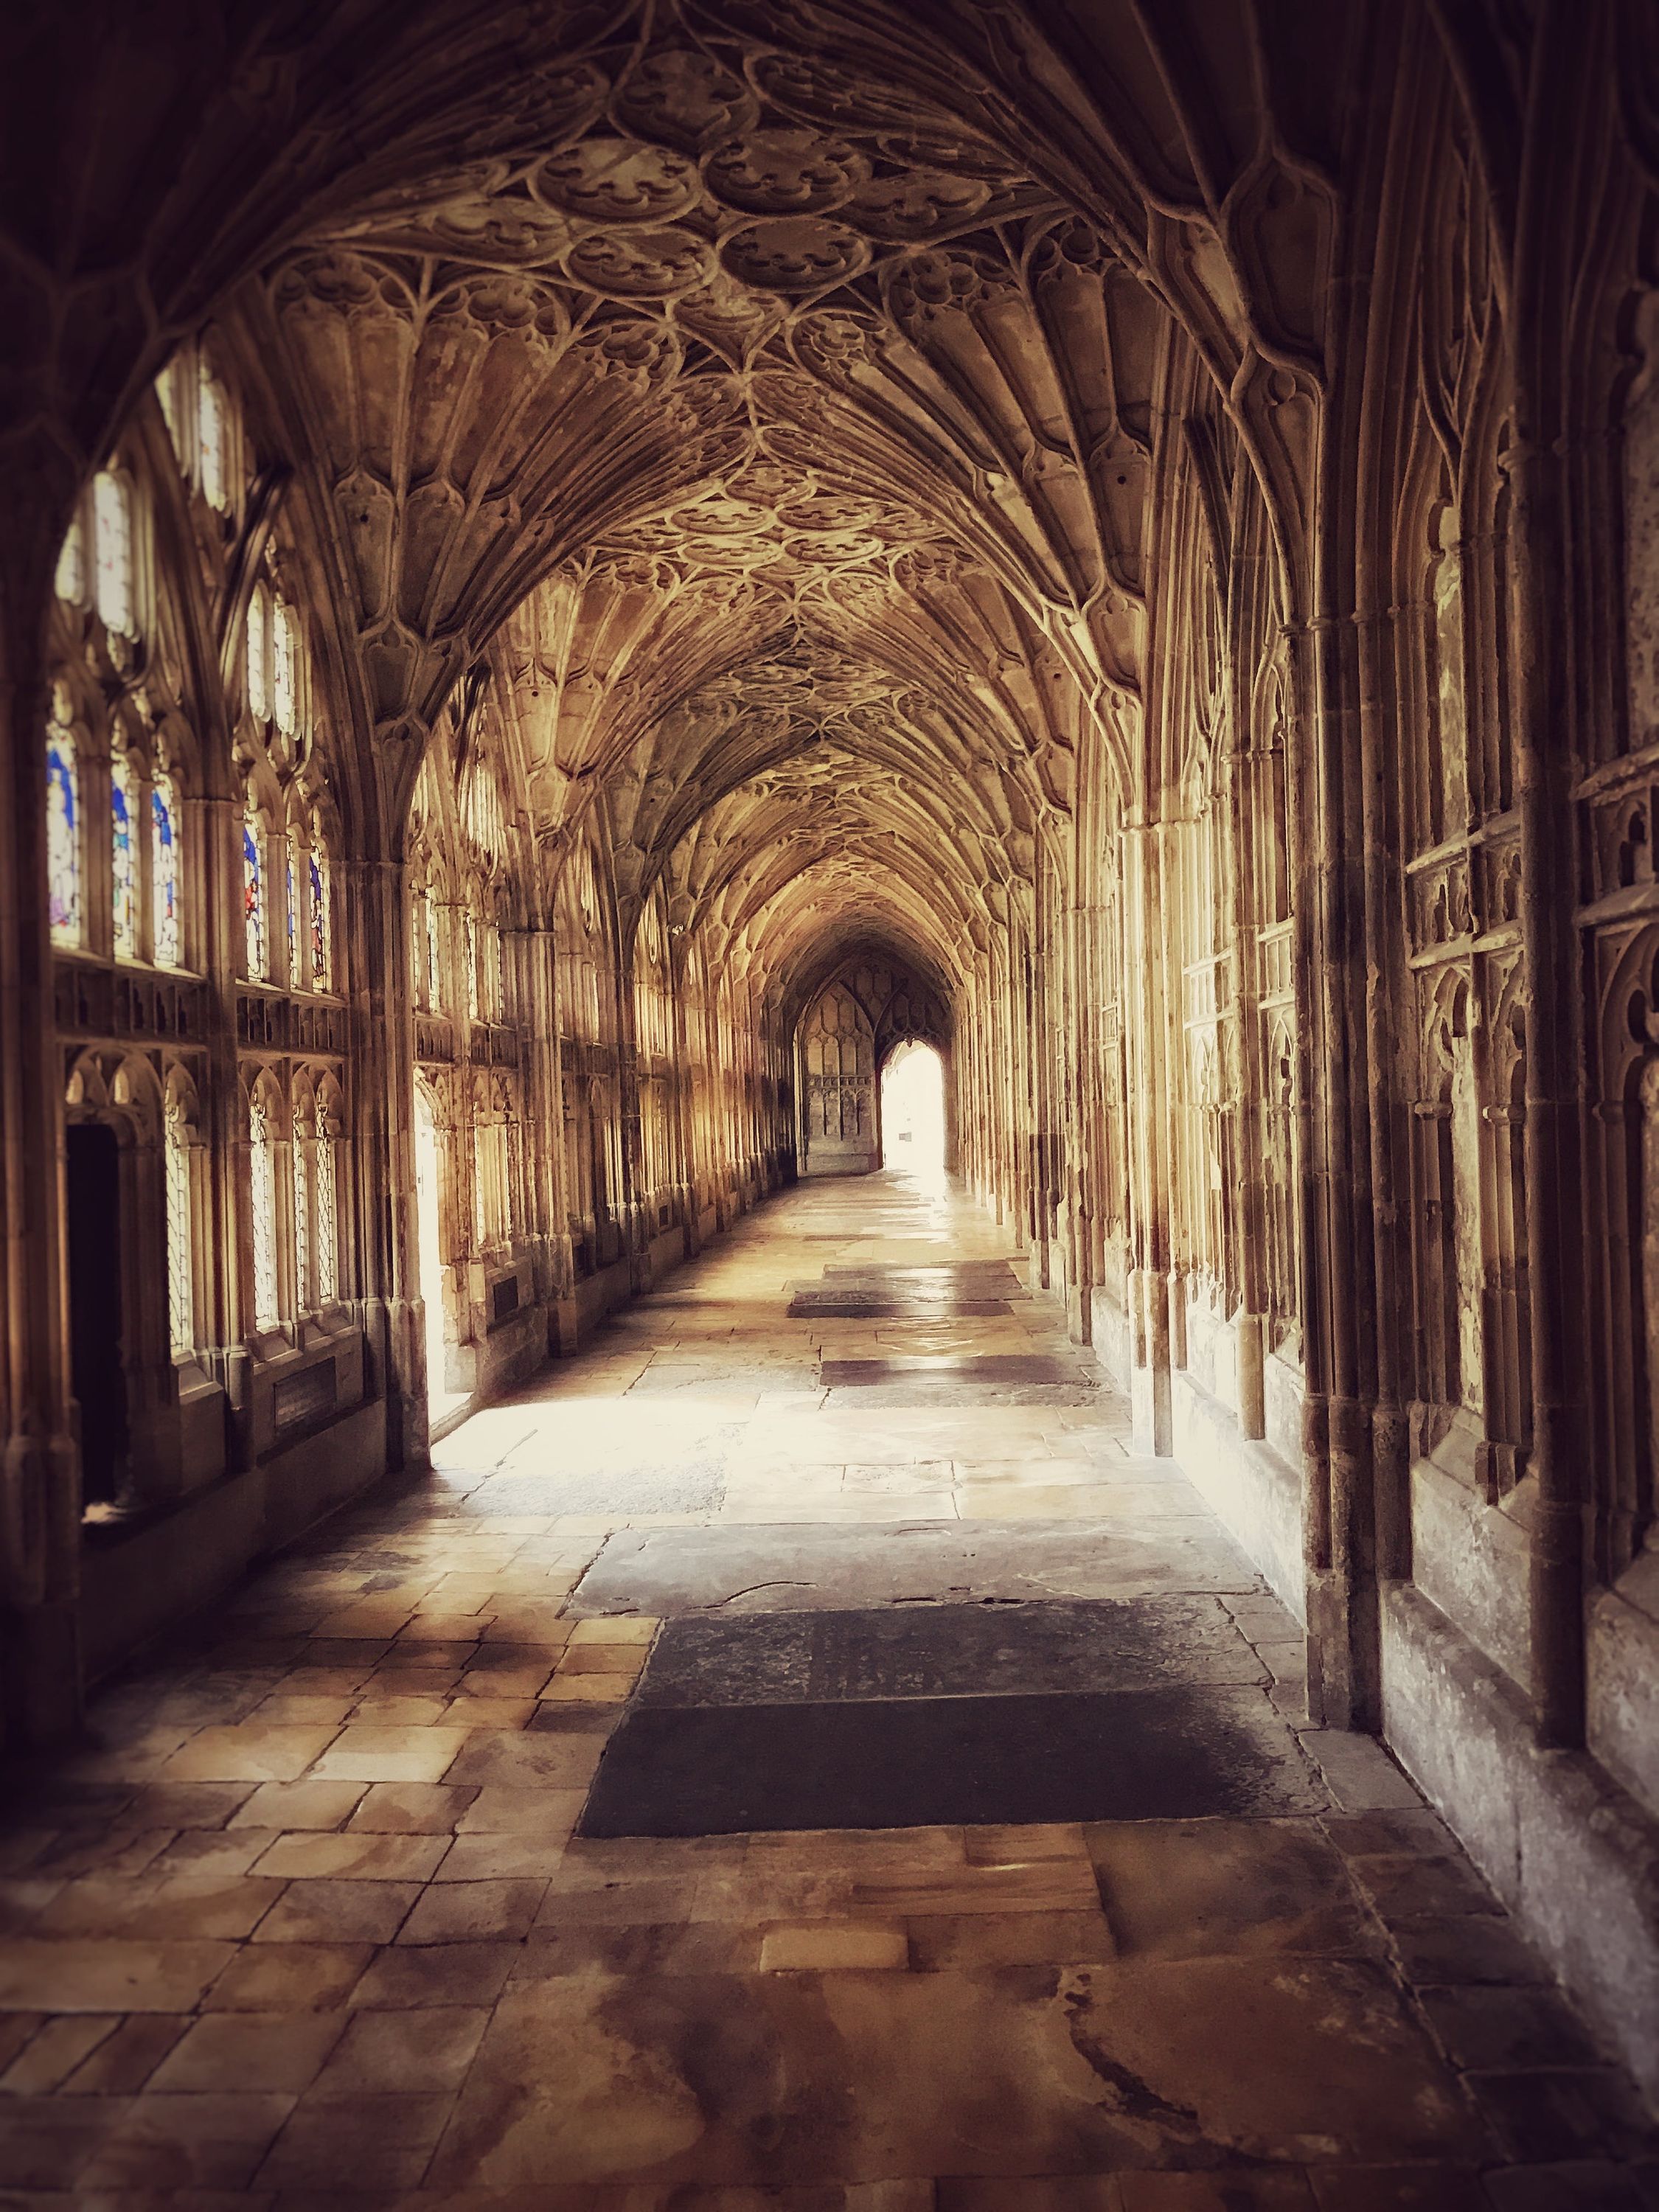 Phote of an old cathedral hall made of stone